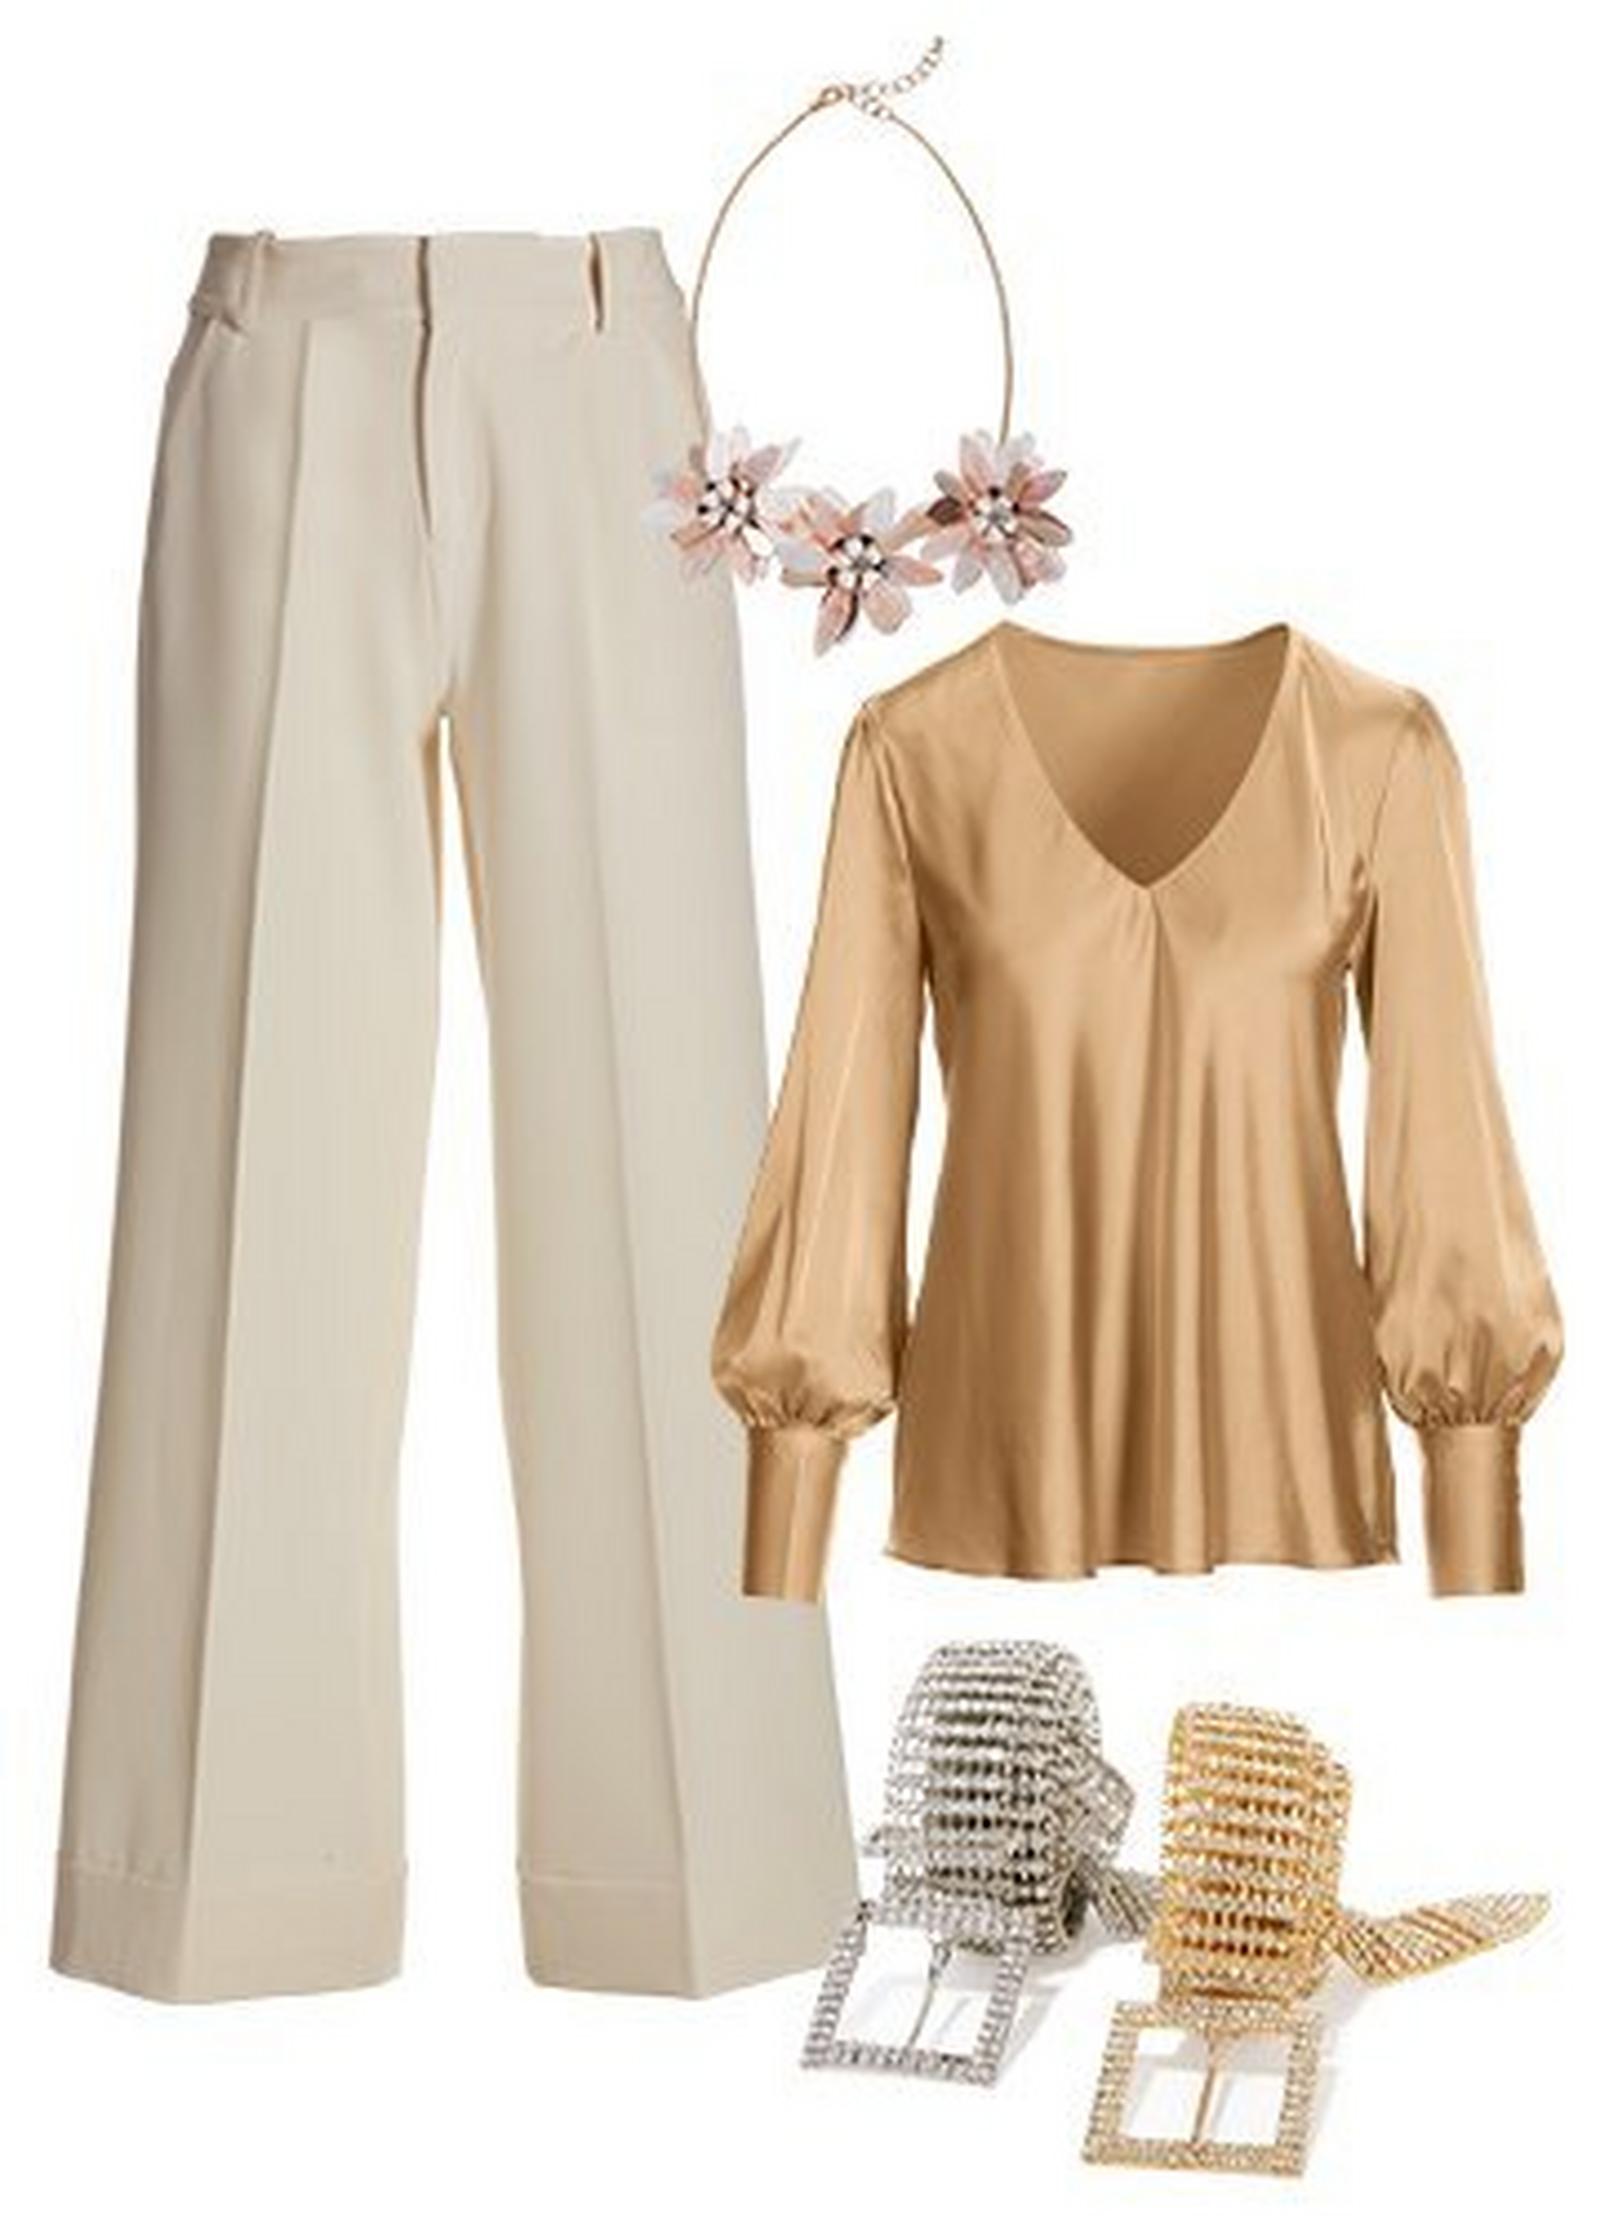 white wide-leg pants, floral resin necklace, gold v-neck long-sleeve charmeuse blouse, and rhinestone belt in silver and gold.